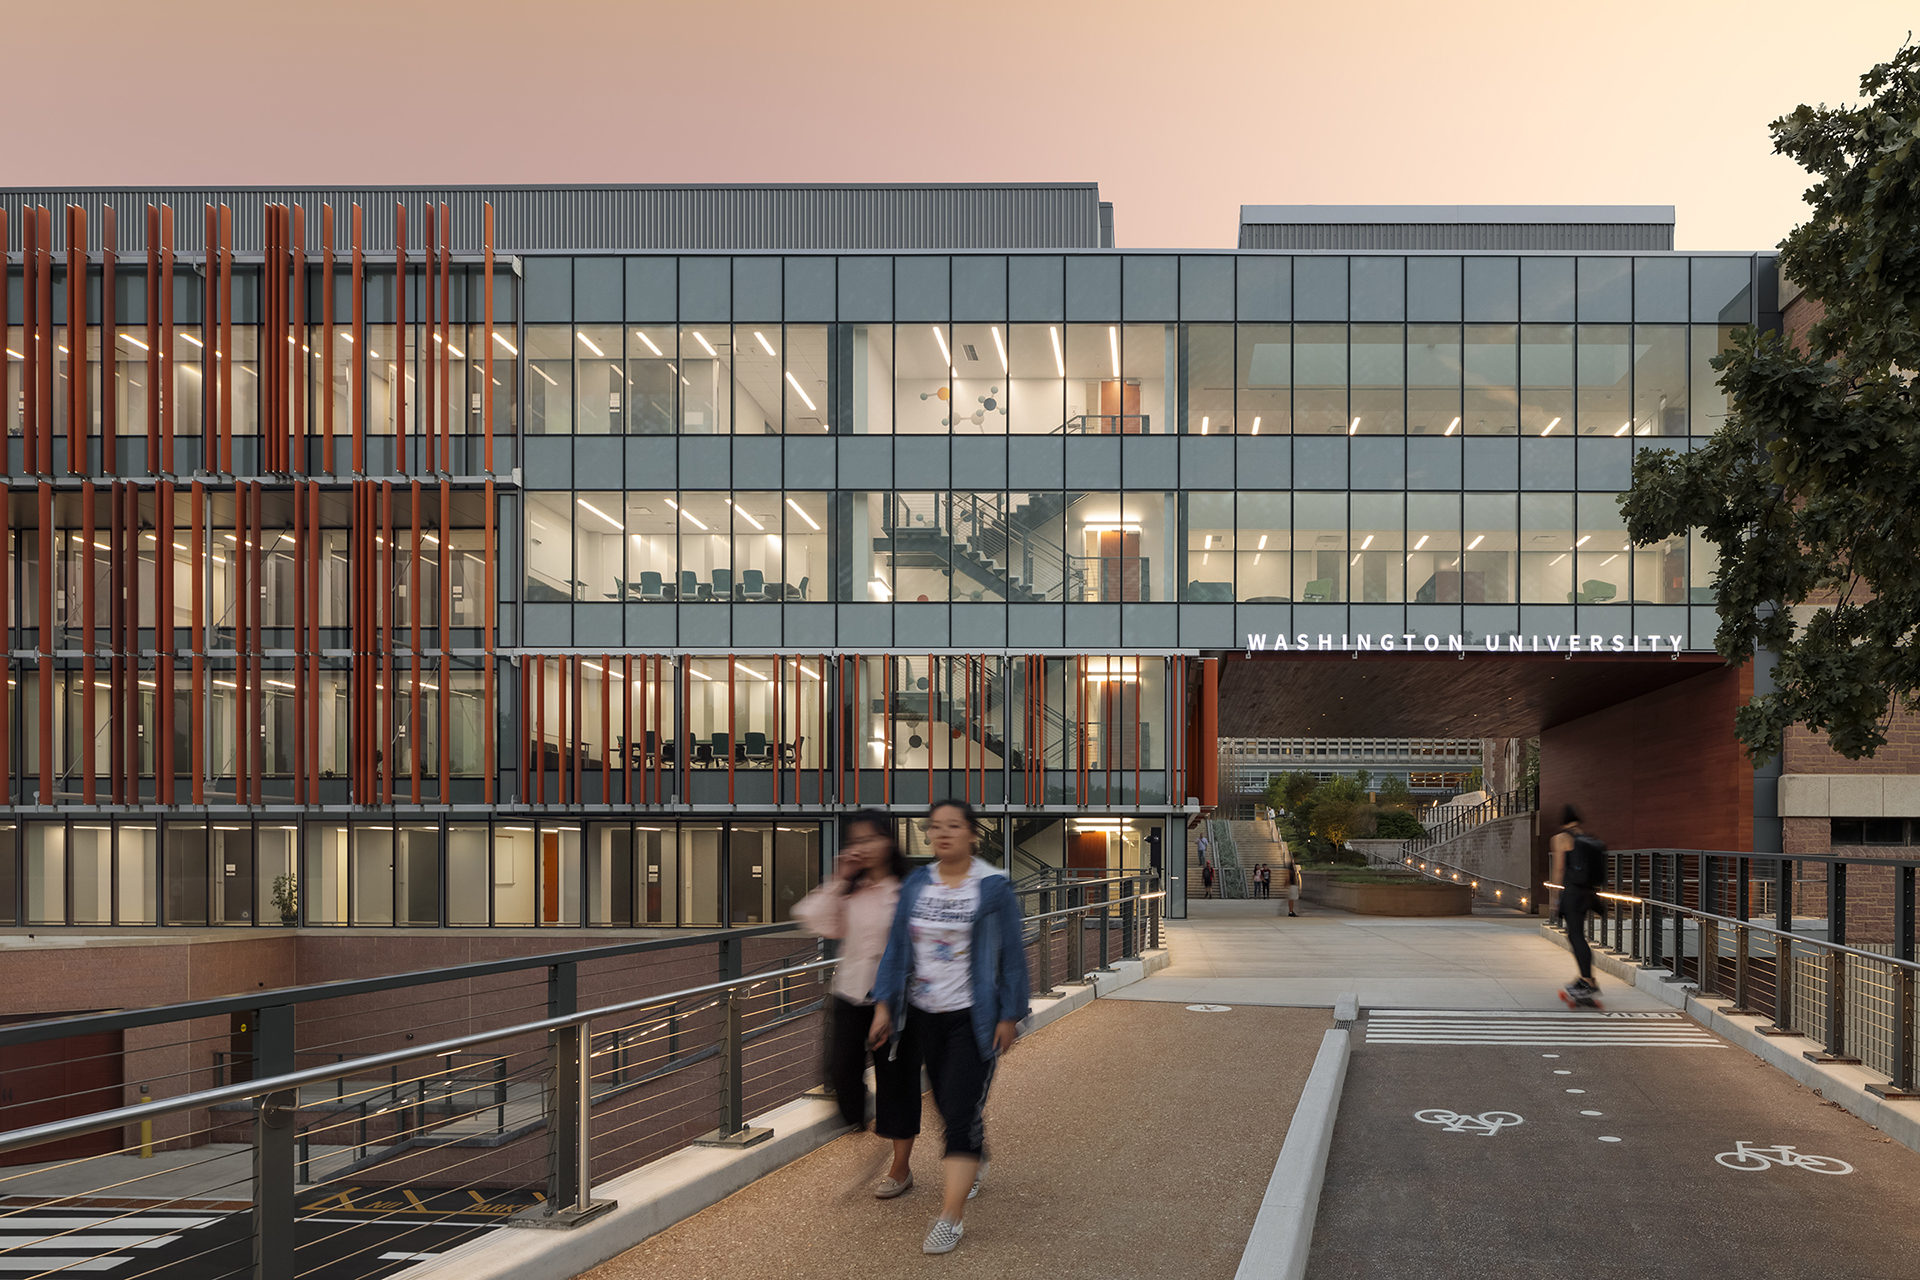 exterior of washington university bryan hall bridge and entry designed by trivers architectural firm in st. louis